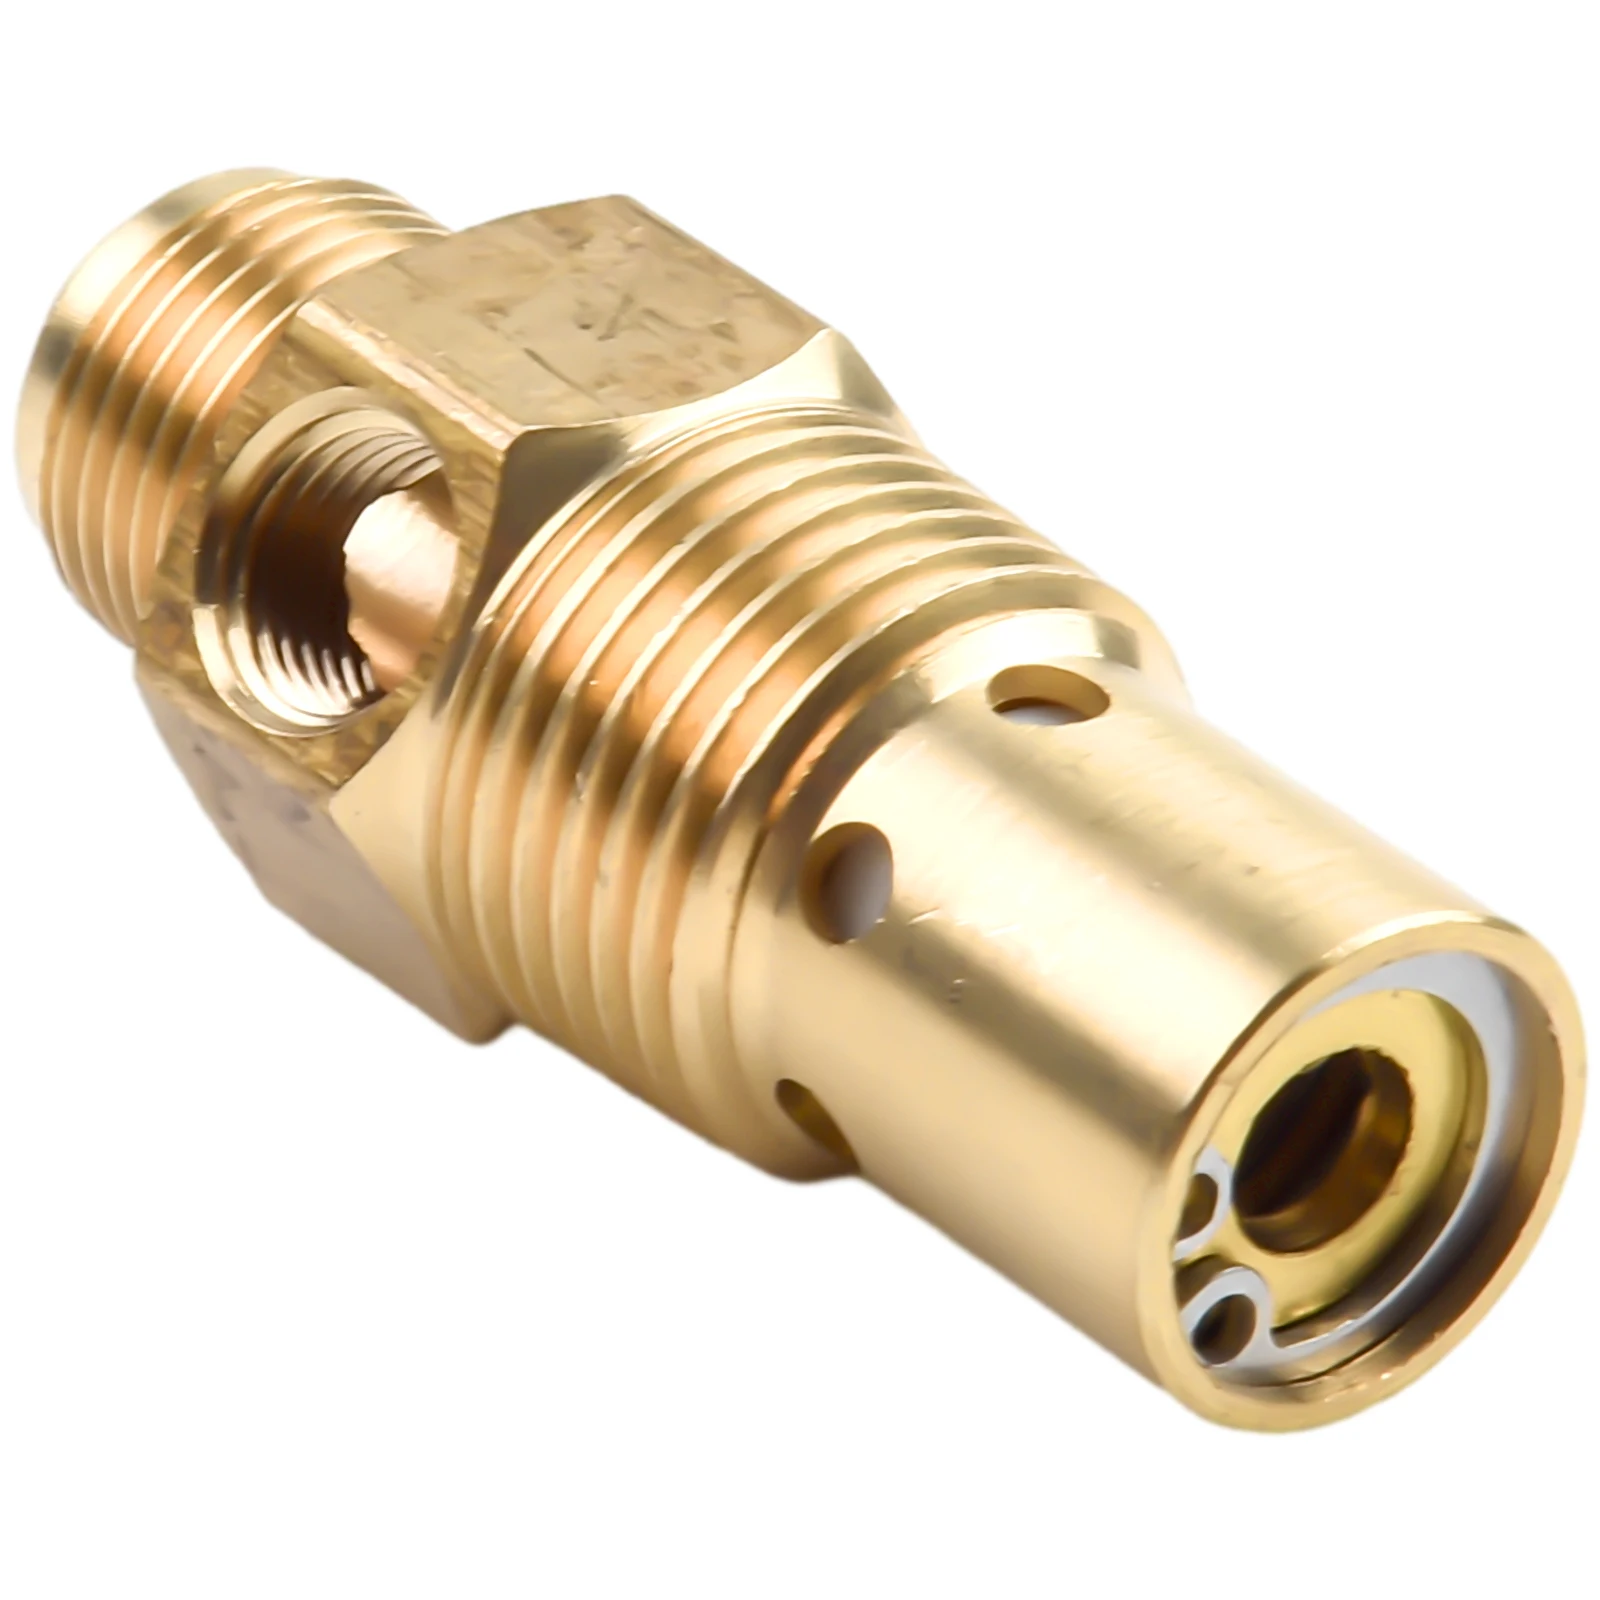 Brass Check Valve G3/8 Air Compressor Male Threaded NPT×1/2In For Air Compressor Replacement Radiator Check Valve 1 piece air compressor parts cast iron heat sink check valve square right angle check valve